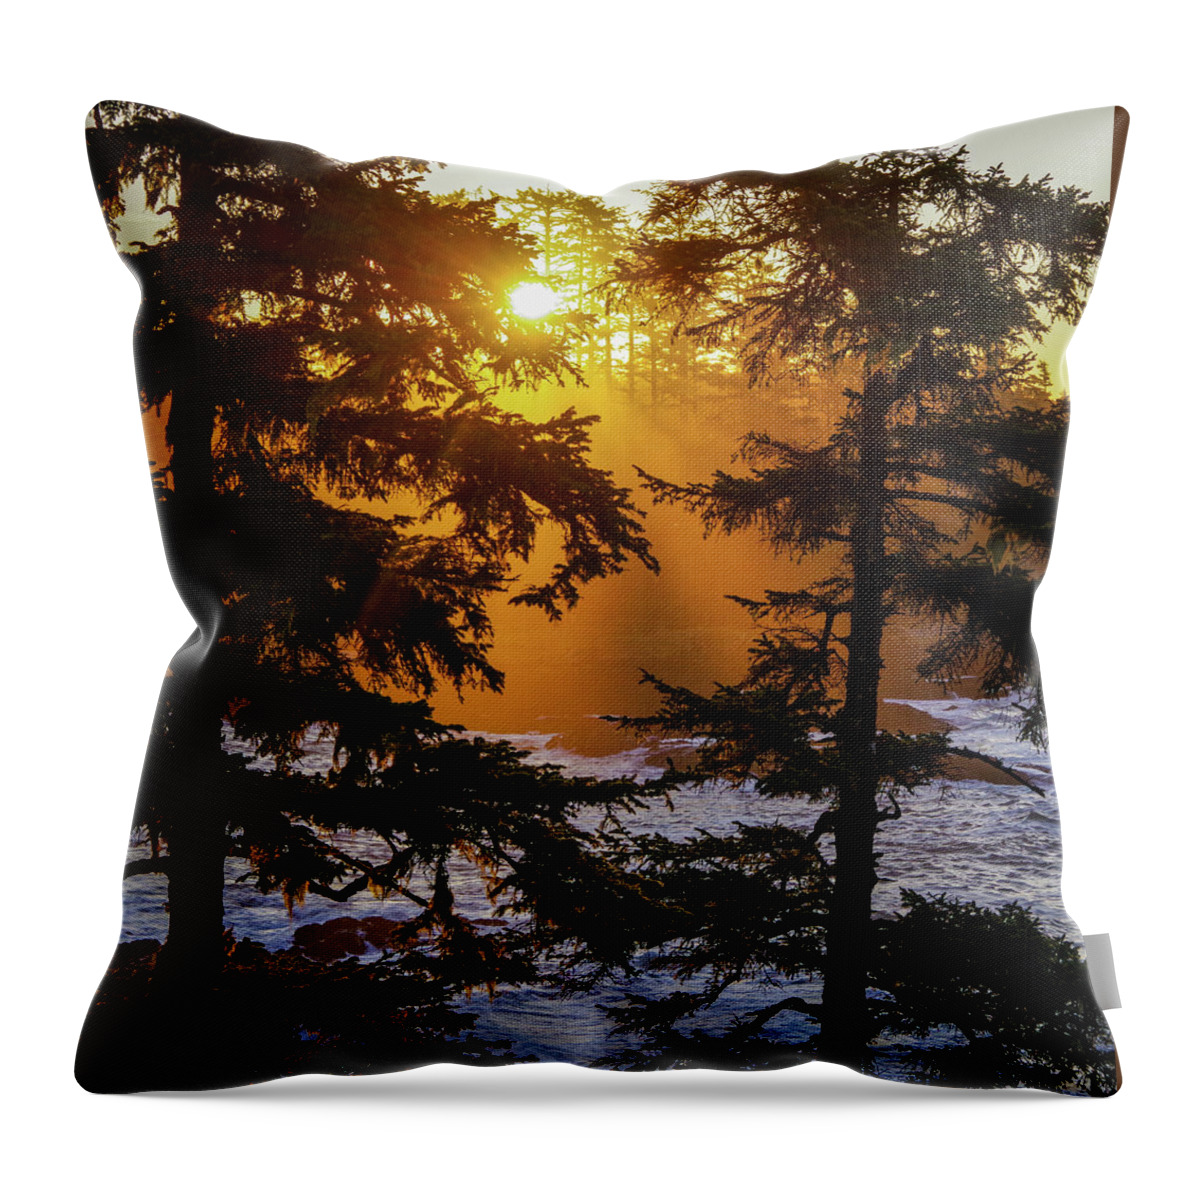 Sunrise Throw Pillow featuring the photograph Here comes the sun by Stephen Sloan